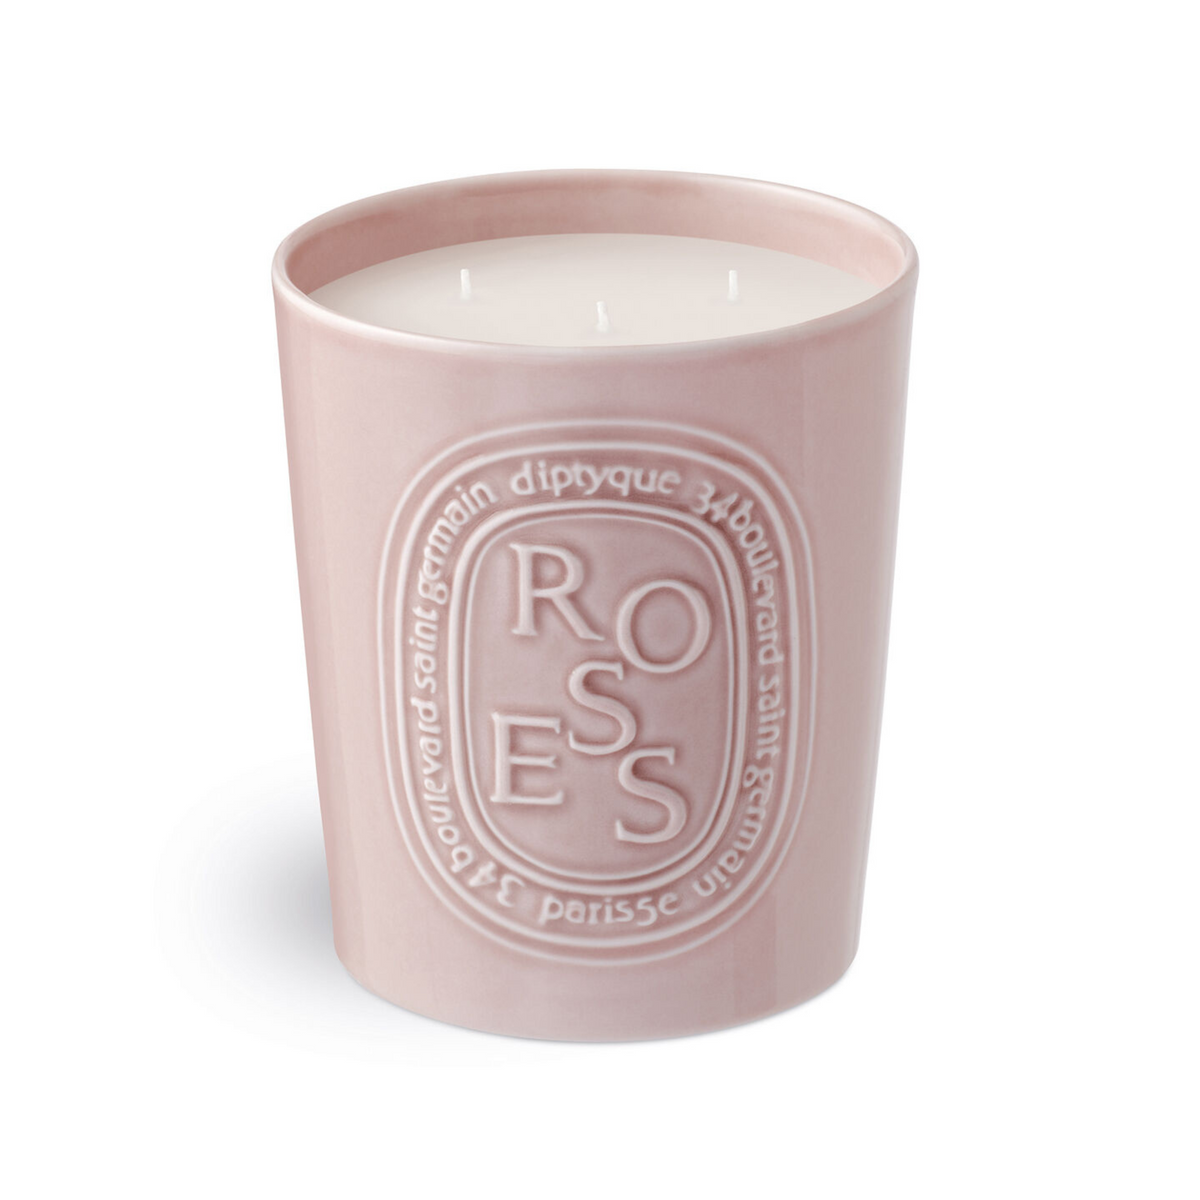 Primary Image of diptyque Paris Rose Candle (600 g)